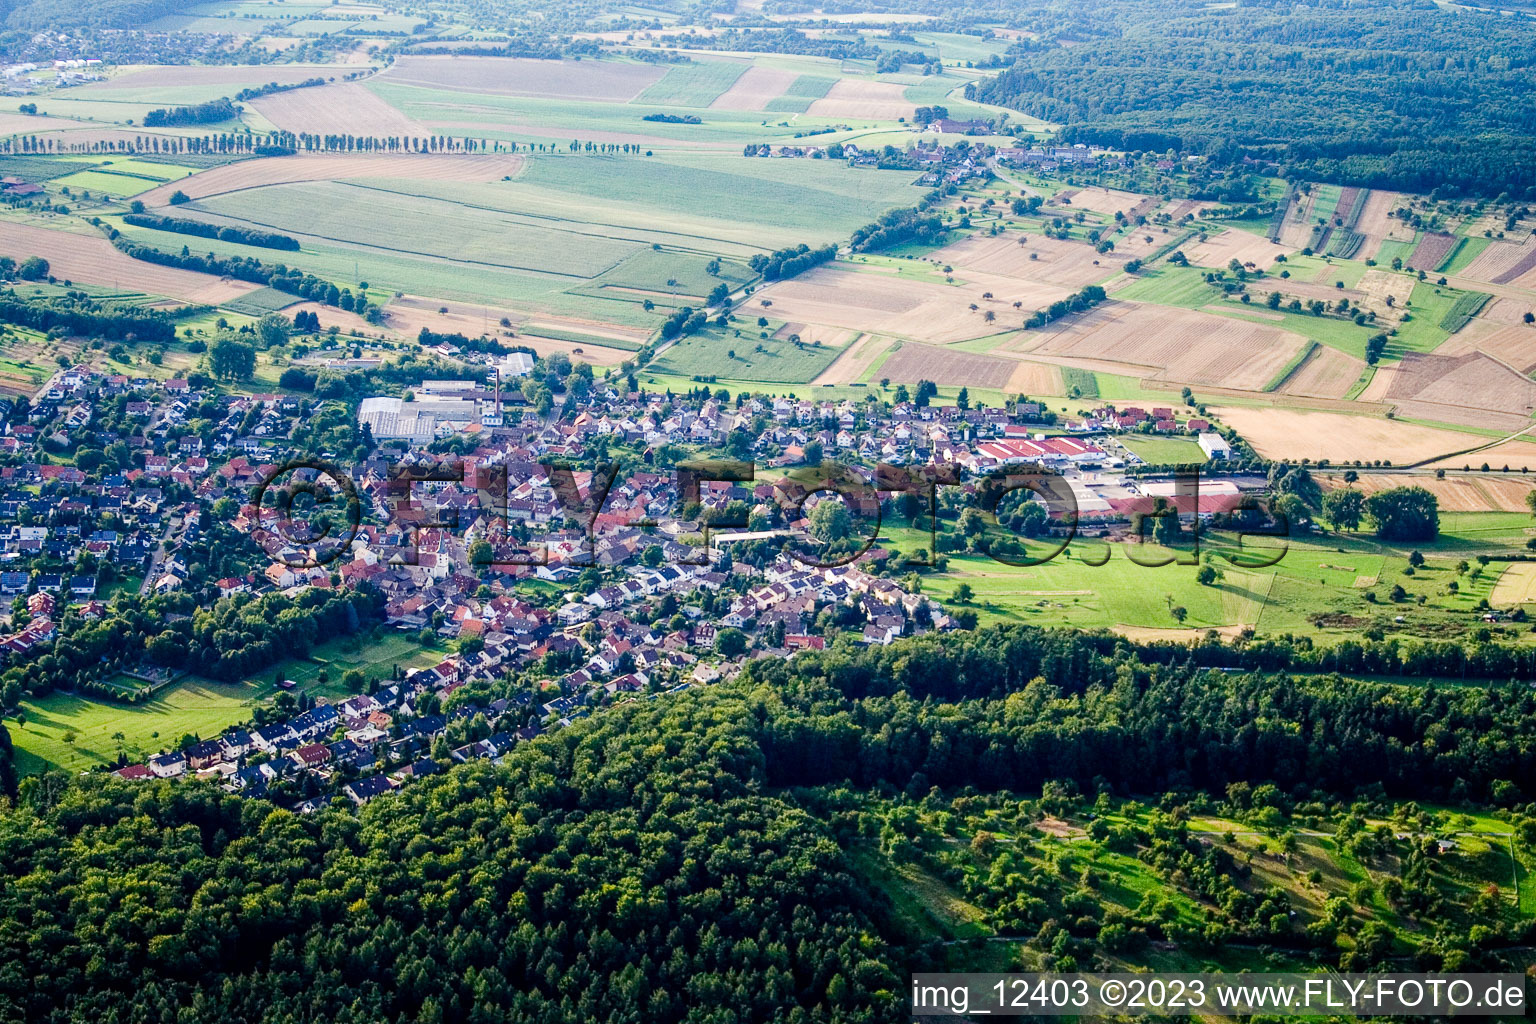 Aerial view of From the south in the district Stupferich in Karlsruhe in the state Baden-Wuerttemberg, Germany